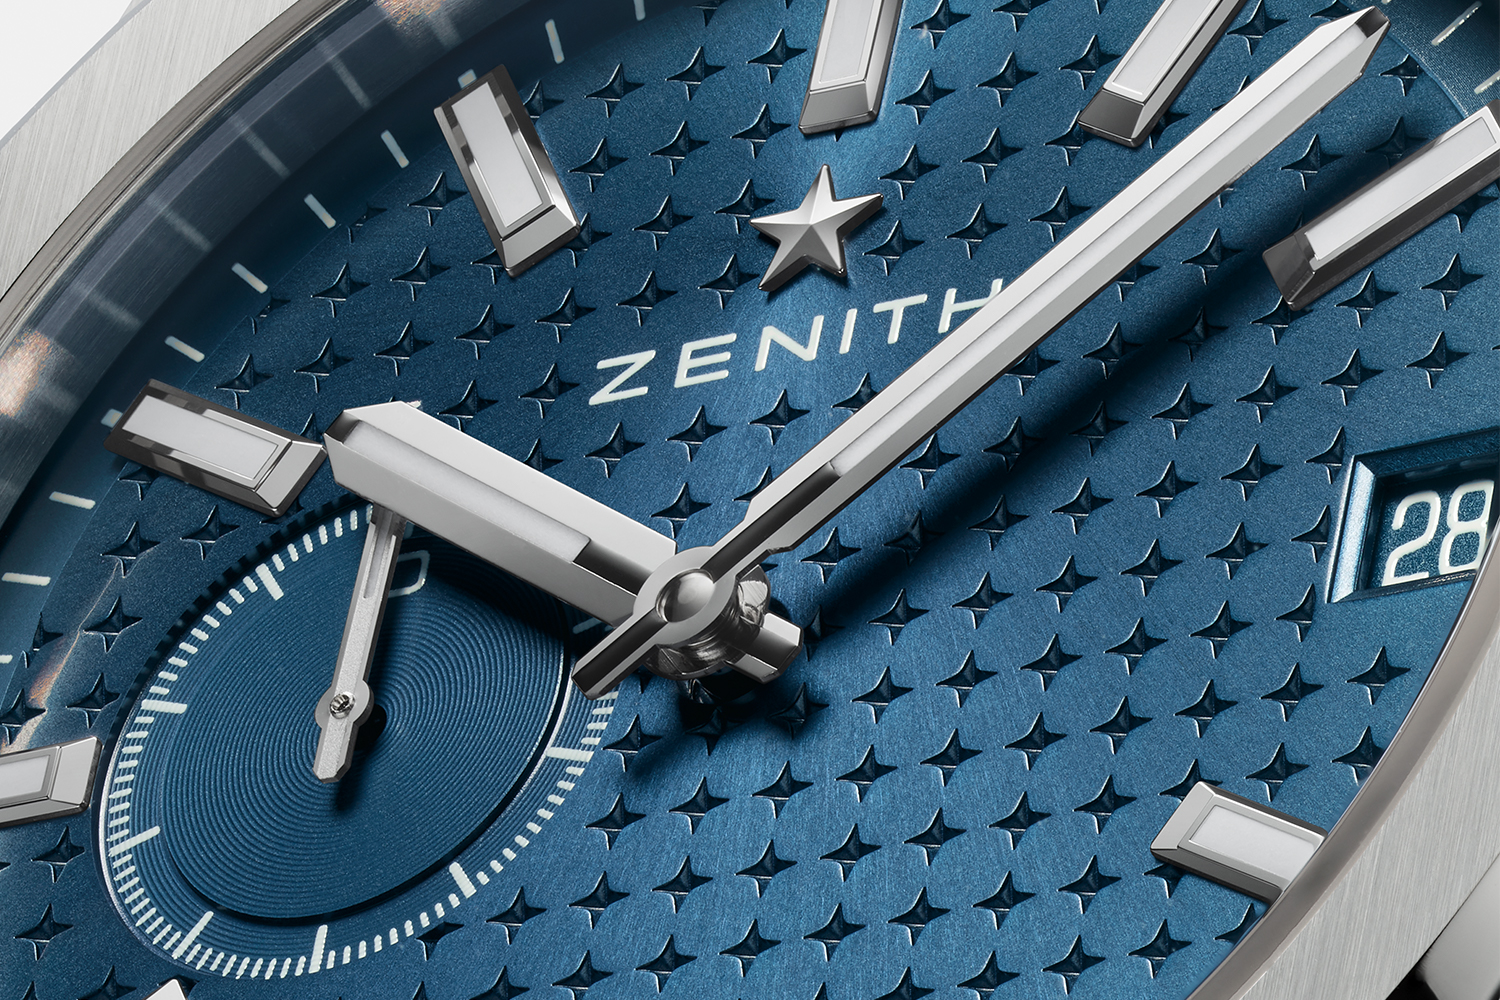 A close-up of the Zenith Defy Skyline watch, featuring a tenth of a second sub-dial and a four-pointed star patten on the dial